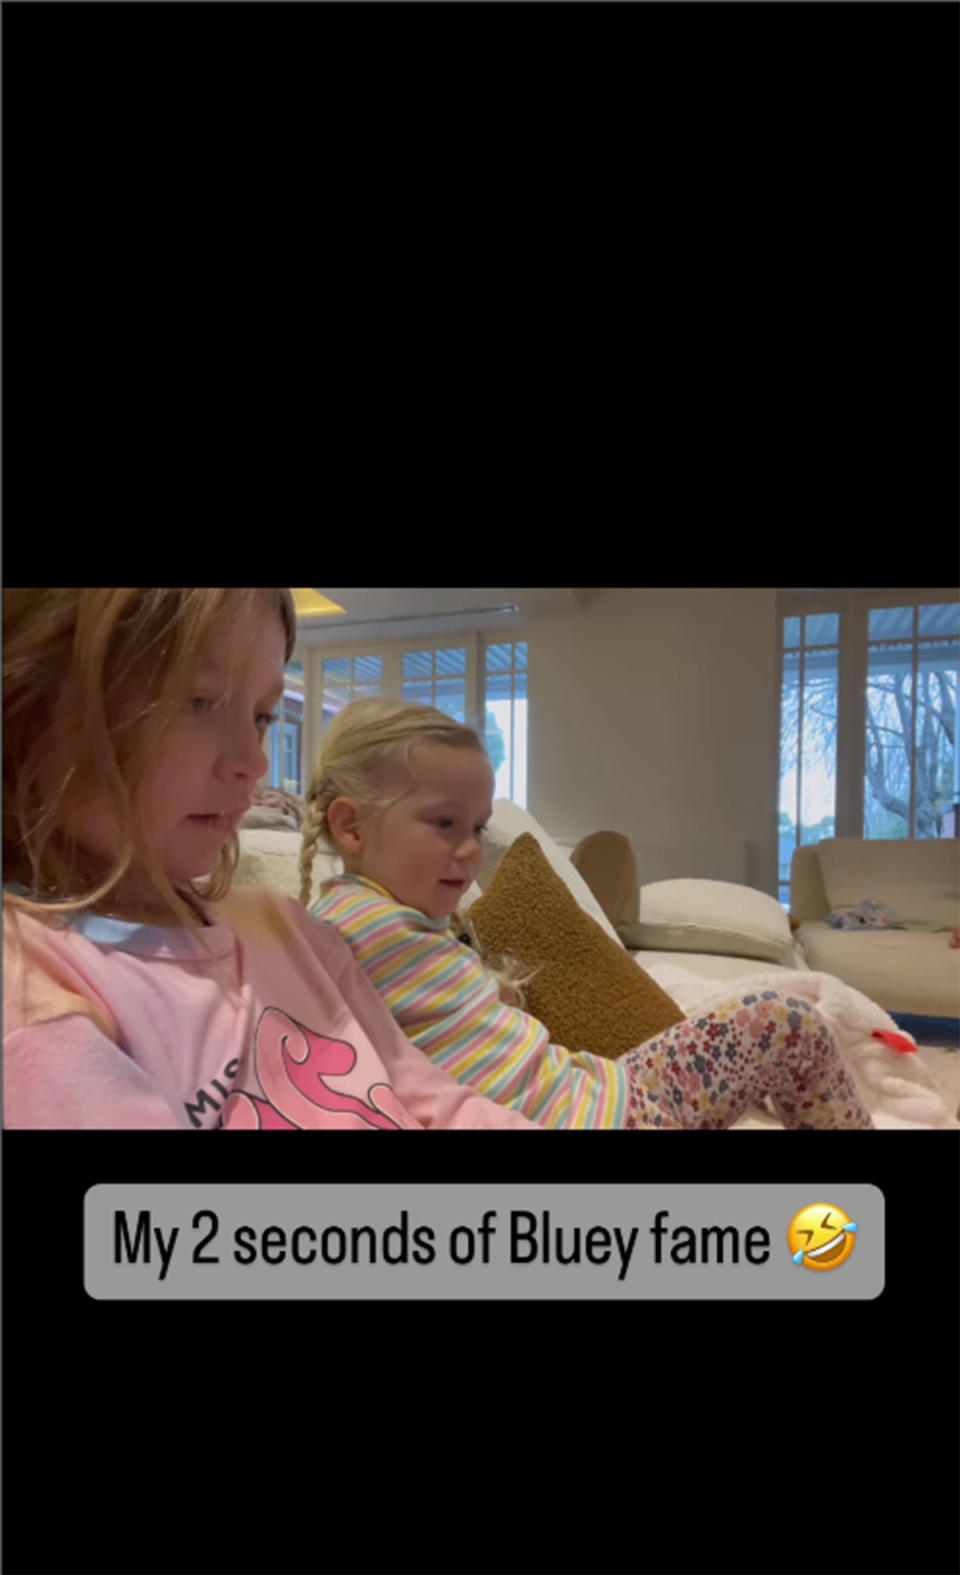 Carrie Bickmore's daughters watching her Bluey cameo